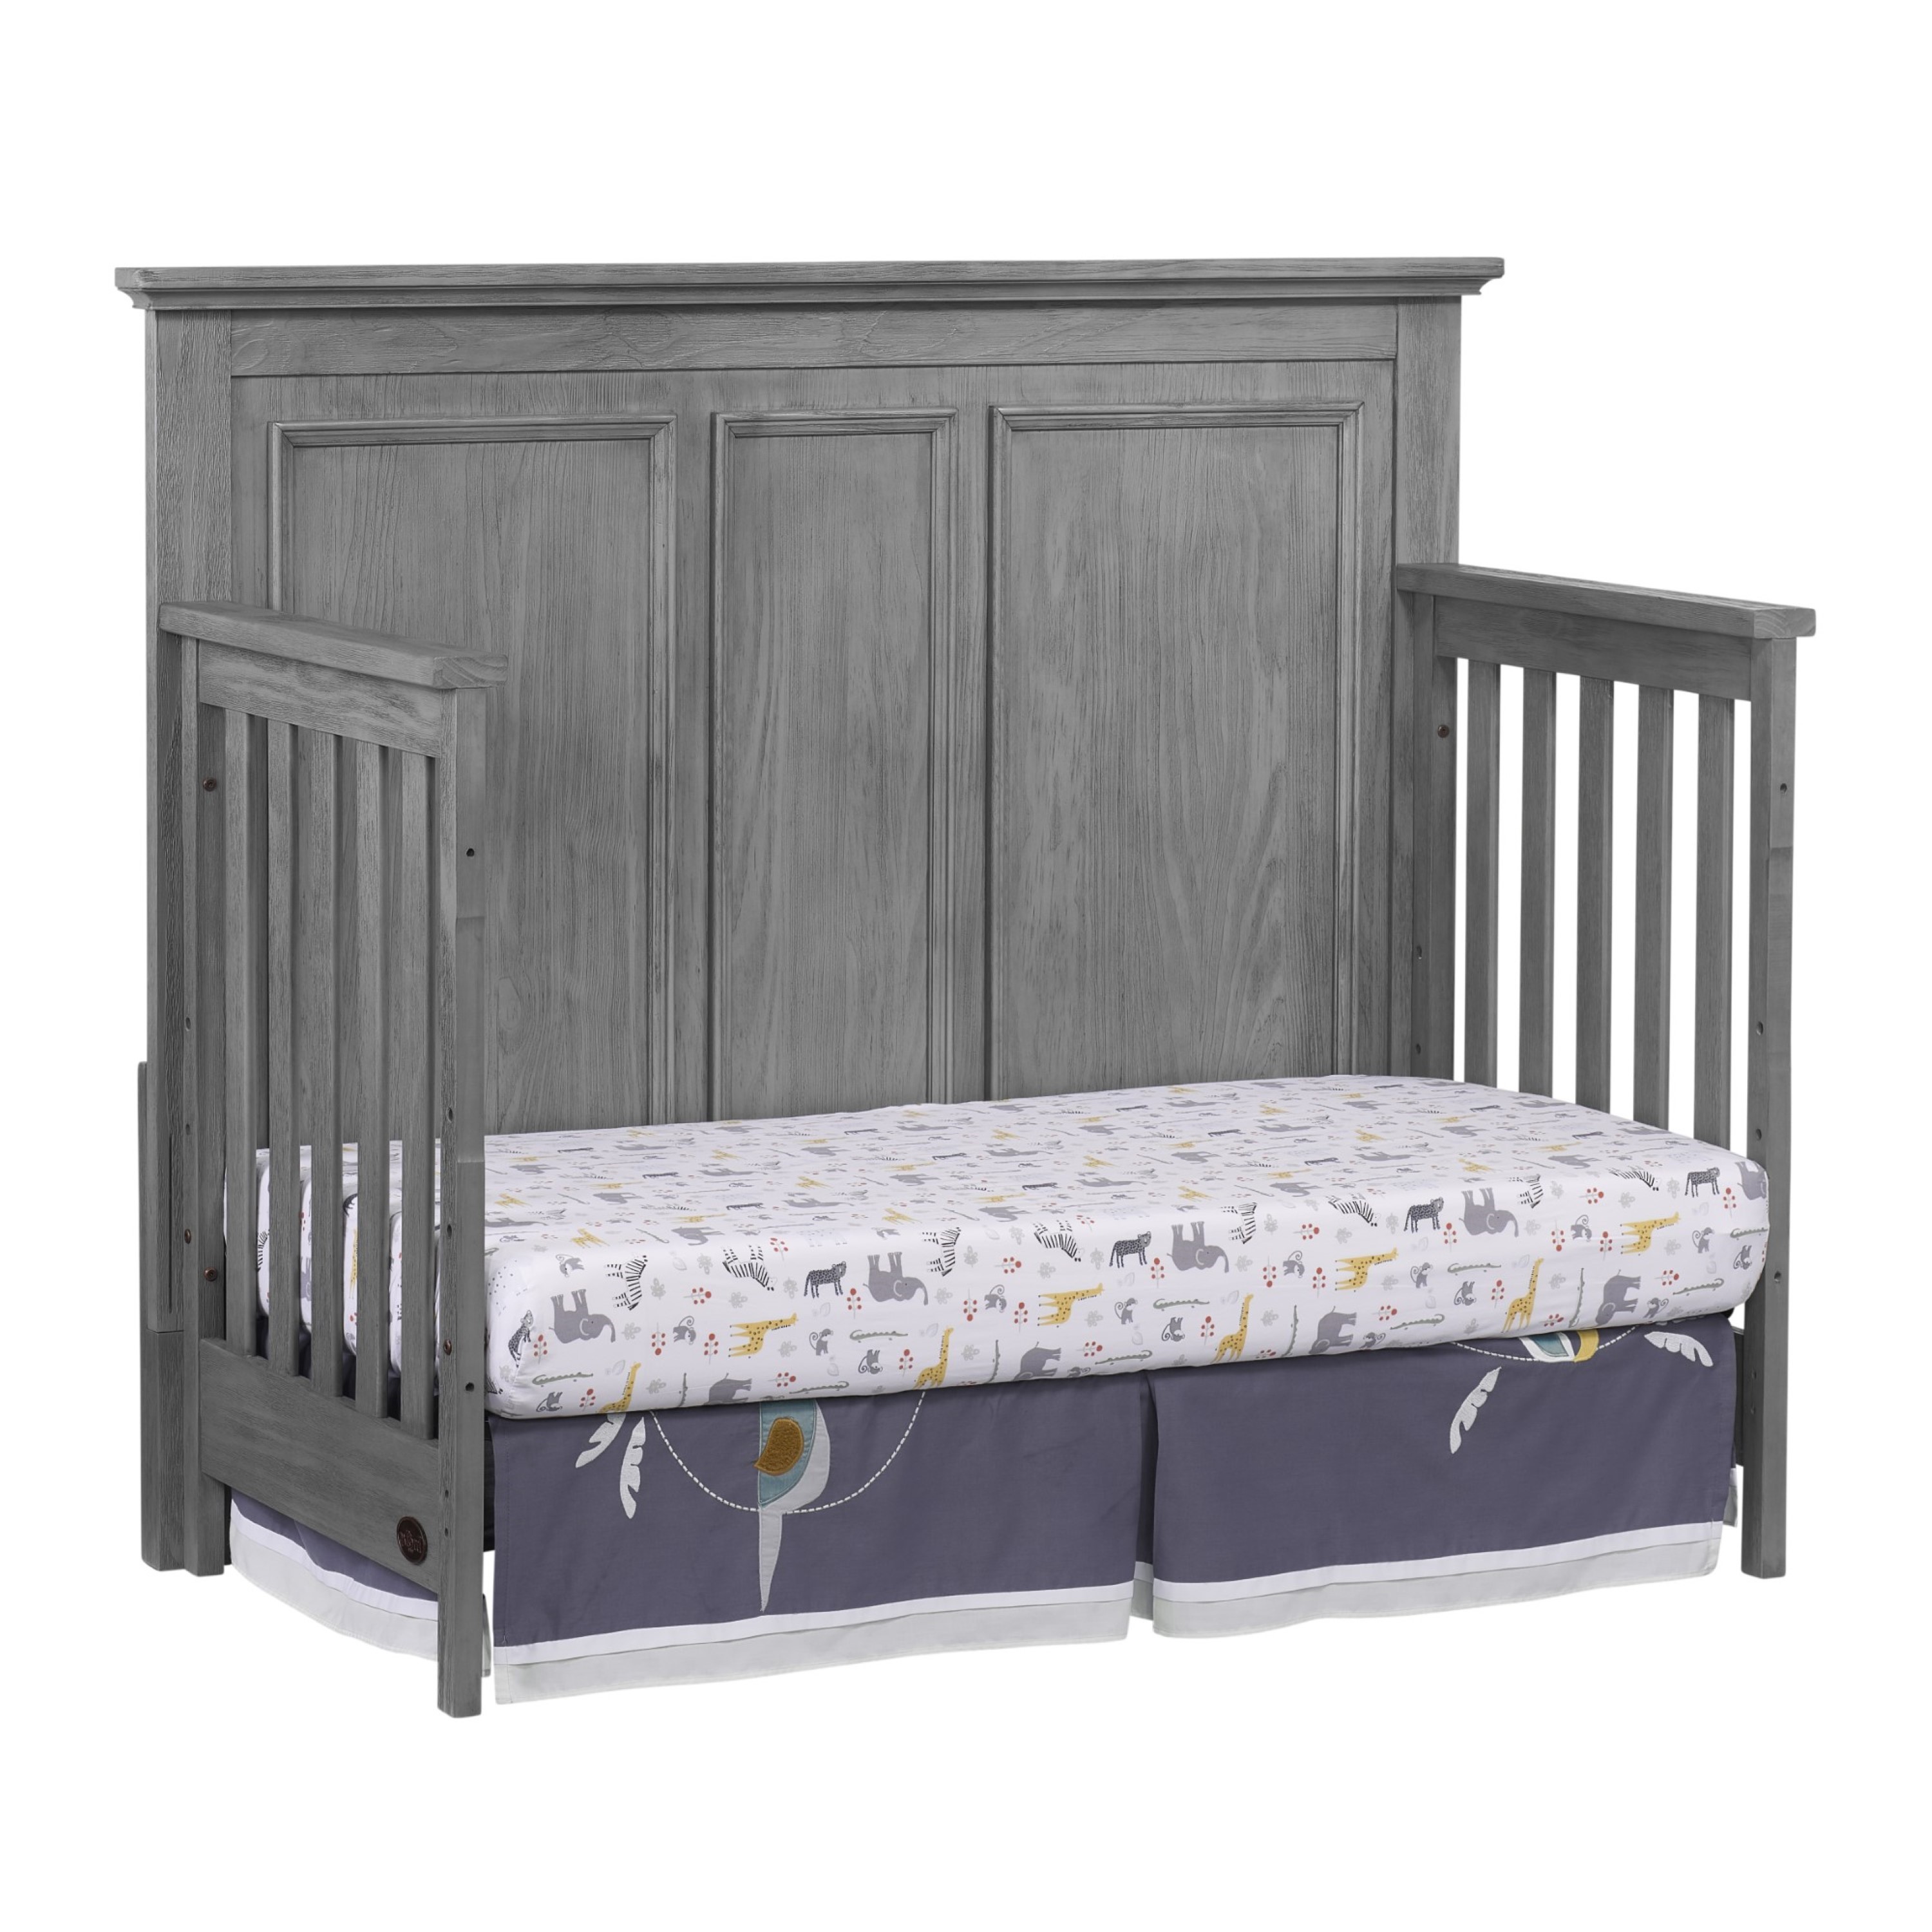 Oxford Baby Kenilworth 4-in-1 Convertible Crib, Graphite Gray, GREENGUARD Gold Certified, Wooden Crib - image 4 of 10